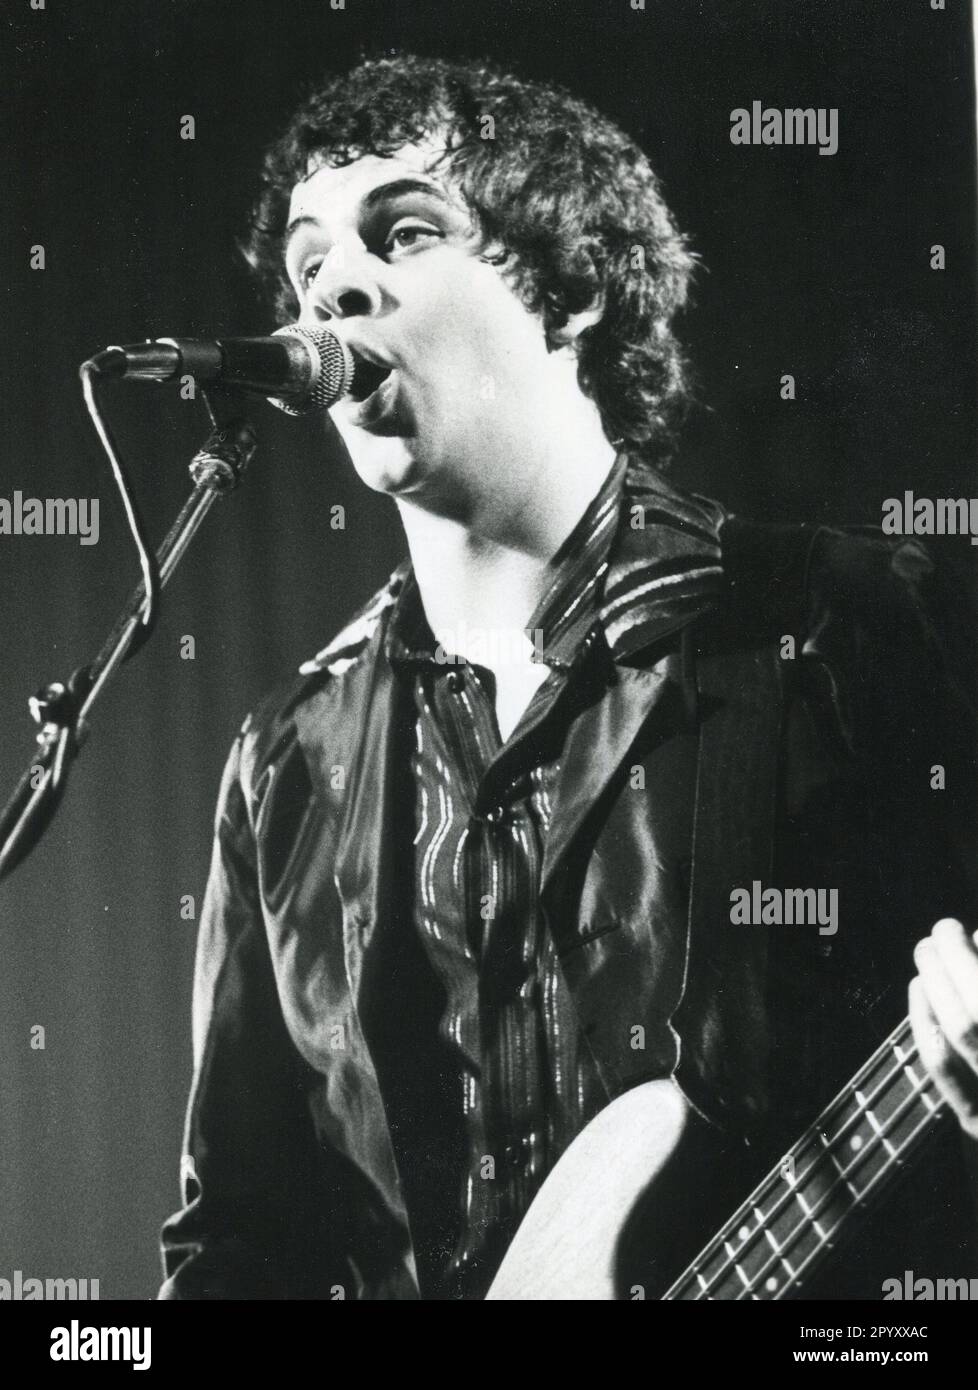 Mark Henry, bass player in British power pop band The Boyfriends, performs in London on July 14, 1978. Stock Photo